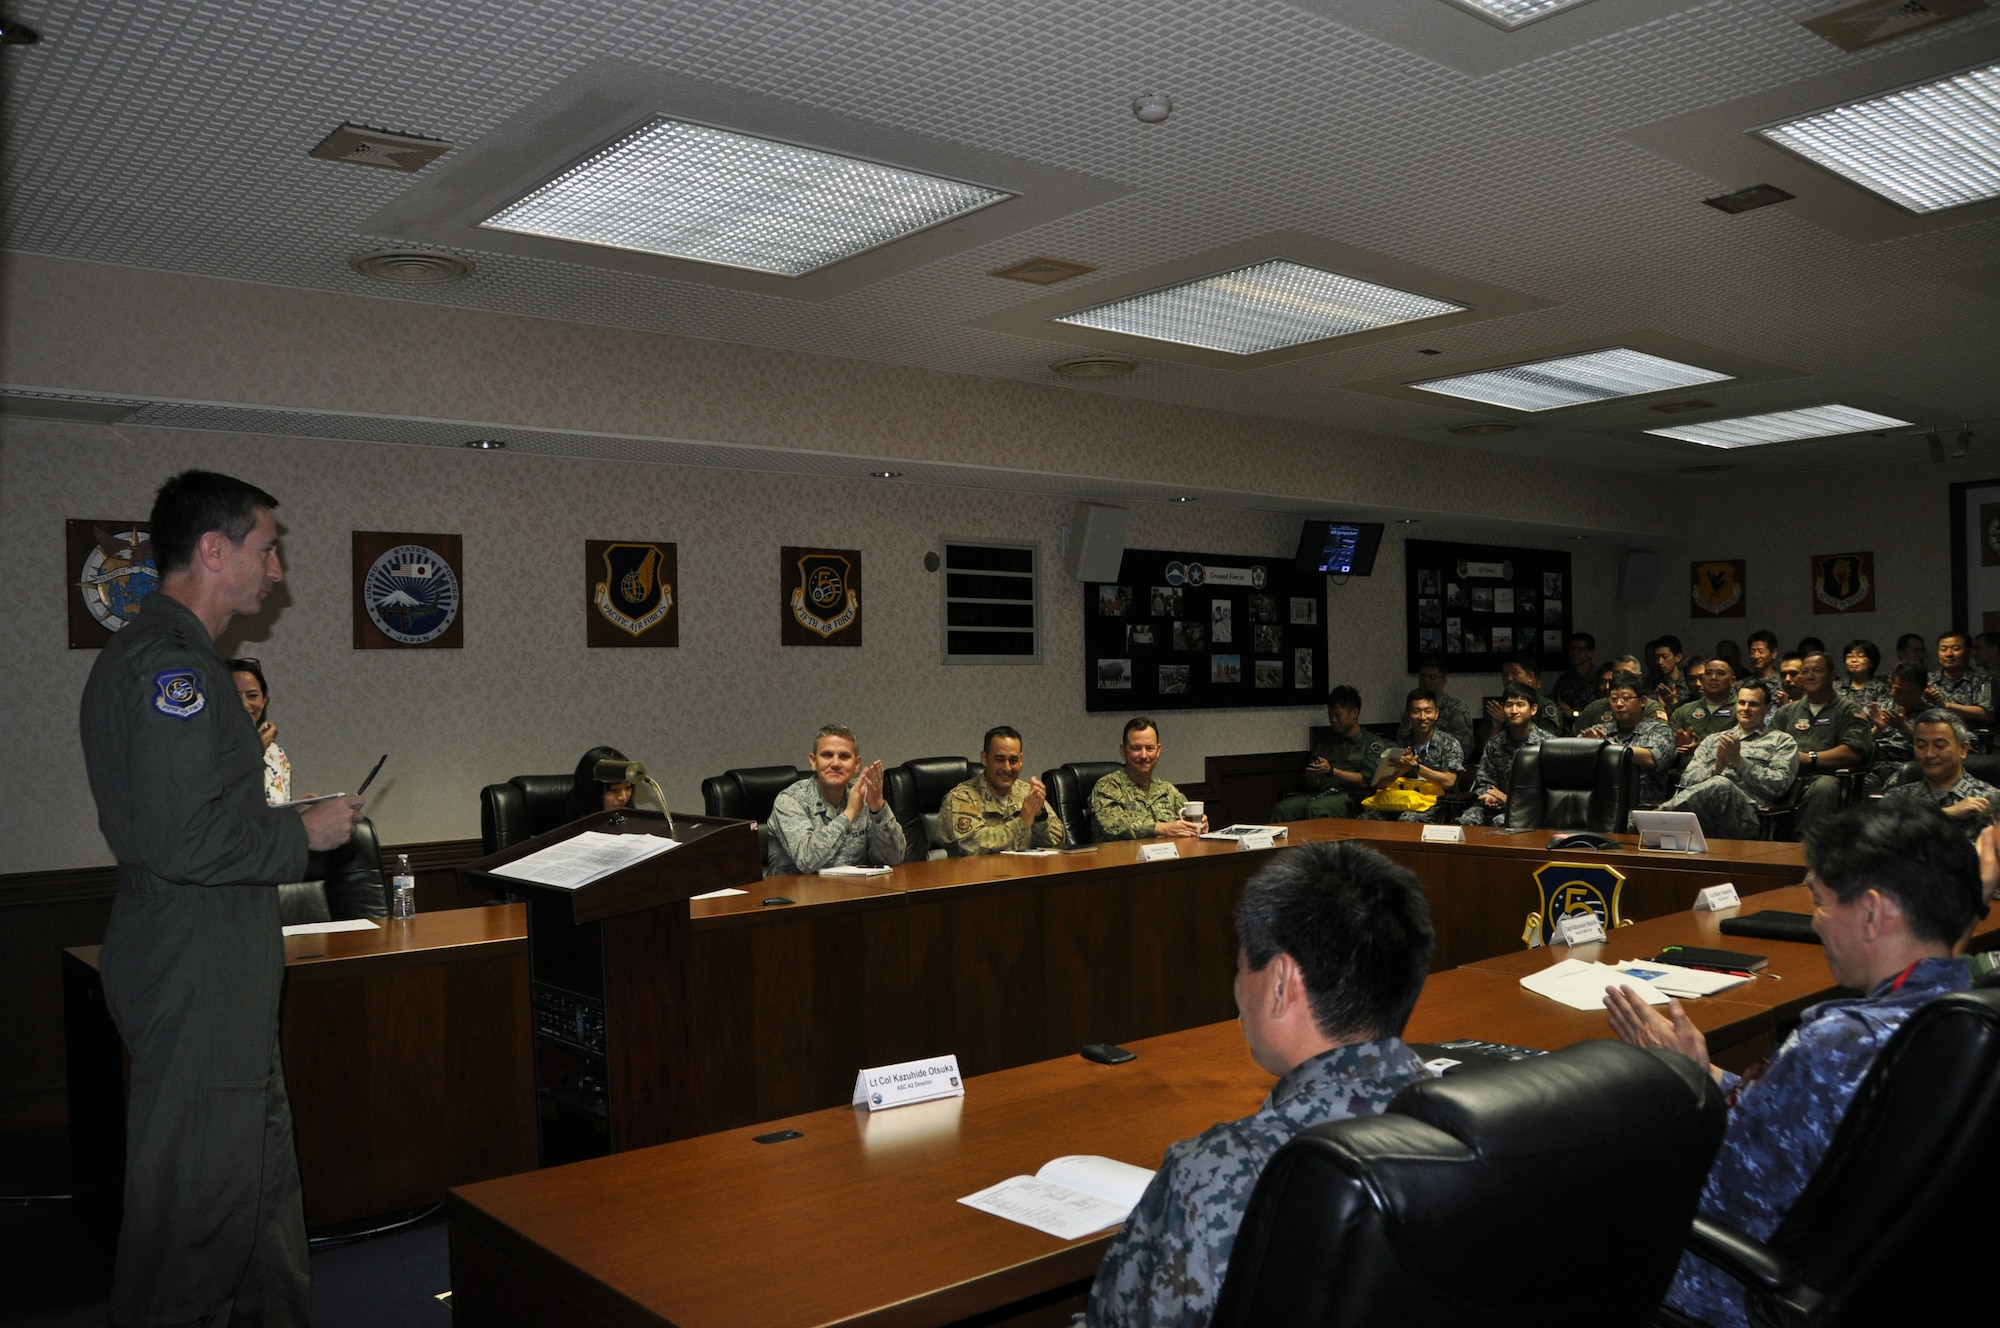 Intelligence, Surveillance and Reconnaissance personnel from 22 organizations across the Indo-Pacific theater including U.S. Air Force, U.S. Navy, and Japan’s Air, Maritime, and Ground Self-Defense Forces attended the inaugural Fifth Air Force joint, bilateral ISR symposium, Yokota Air Base, May 30-31, 2019. In an effort to meet the symposium objectives, the participants outlined key information sharing processes and conducted a table-top exercise to determine areas for increased cooperation, ultimately identifying solutions to pursue in future, joint ISR collaboration.